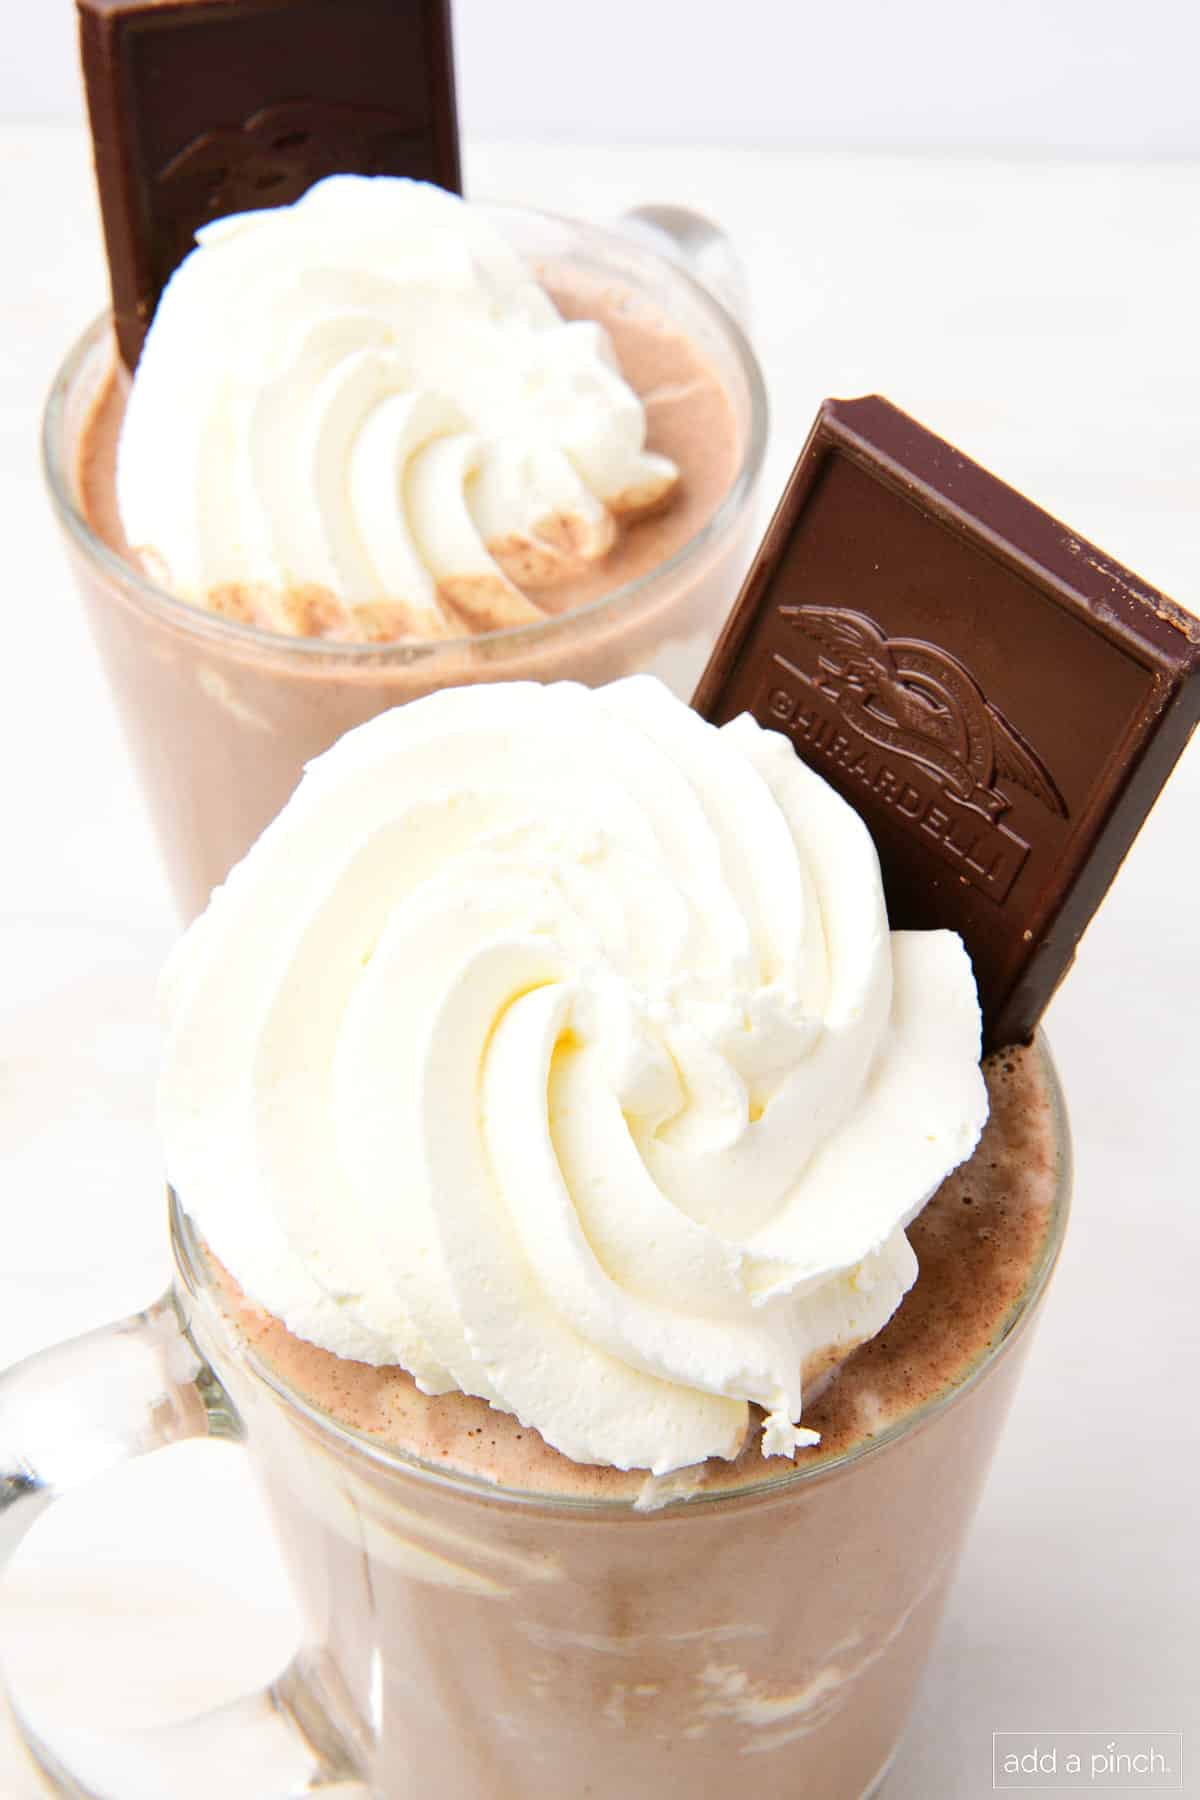 Mugs filled with hot chocolate and whipped cream, and a chocolate bar for garnish.